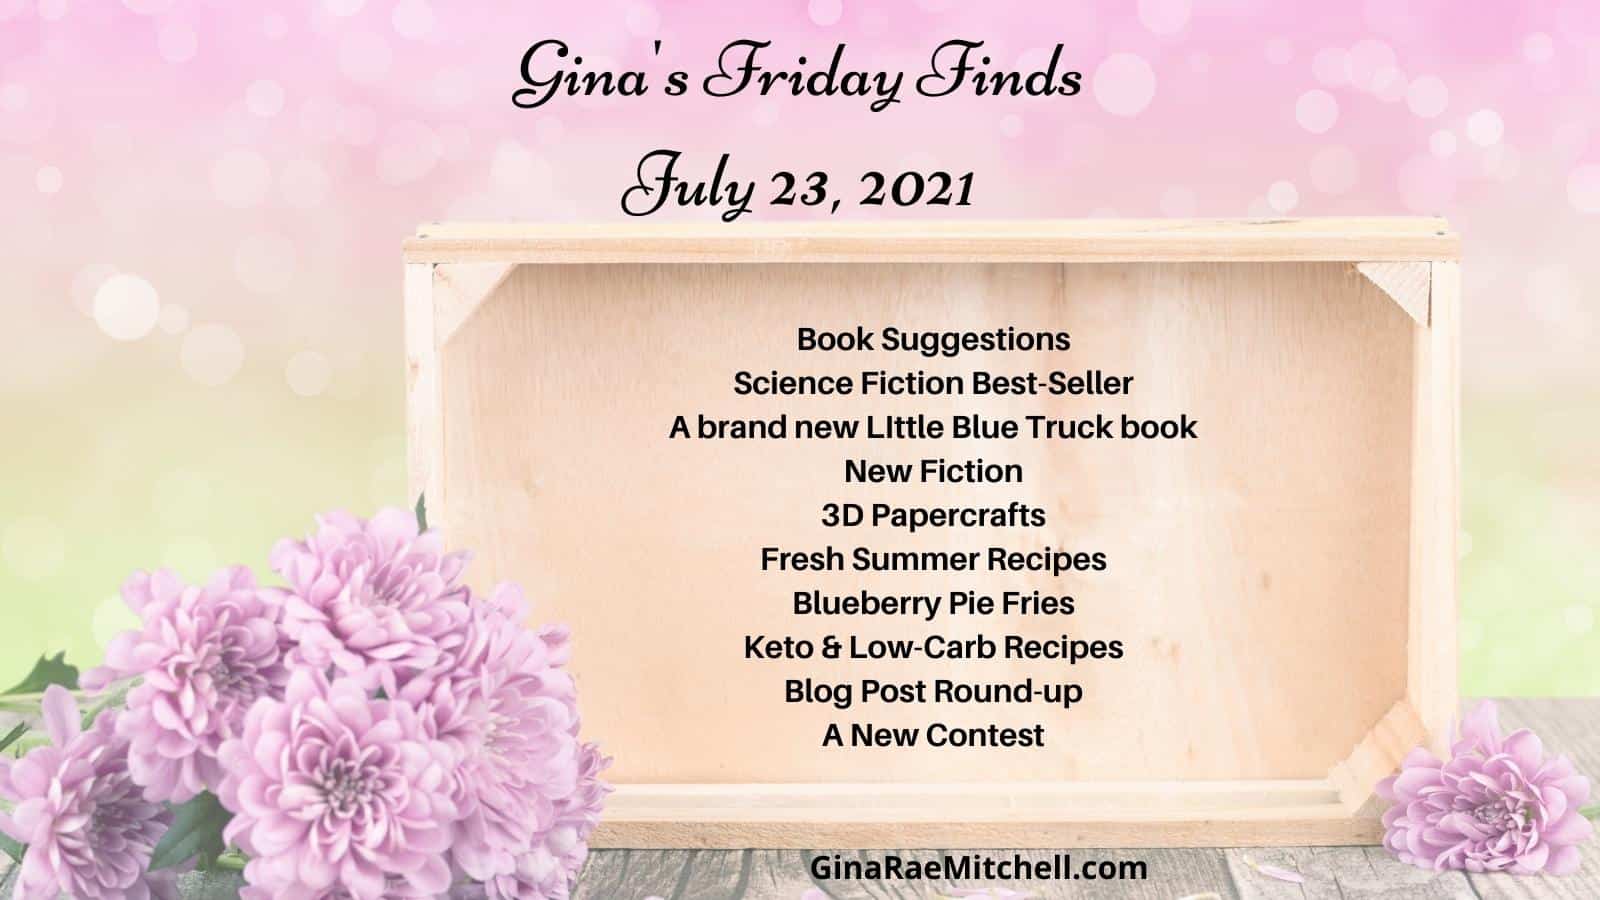 Gina's Friday Finds July 23, 2021